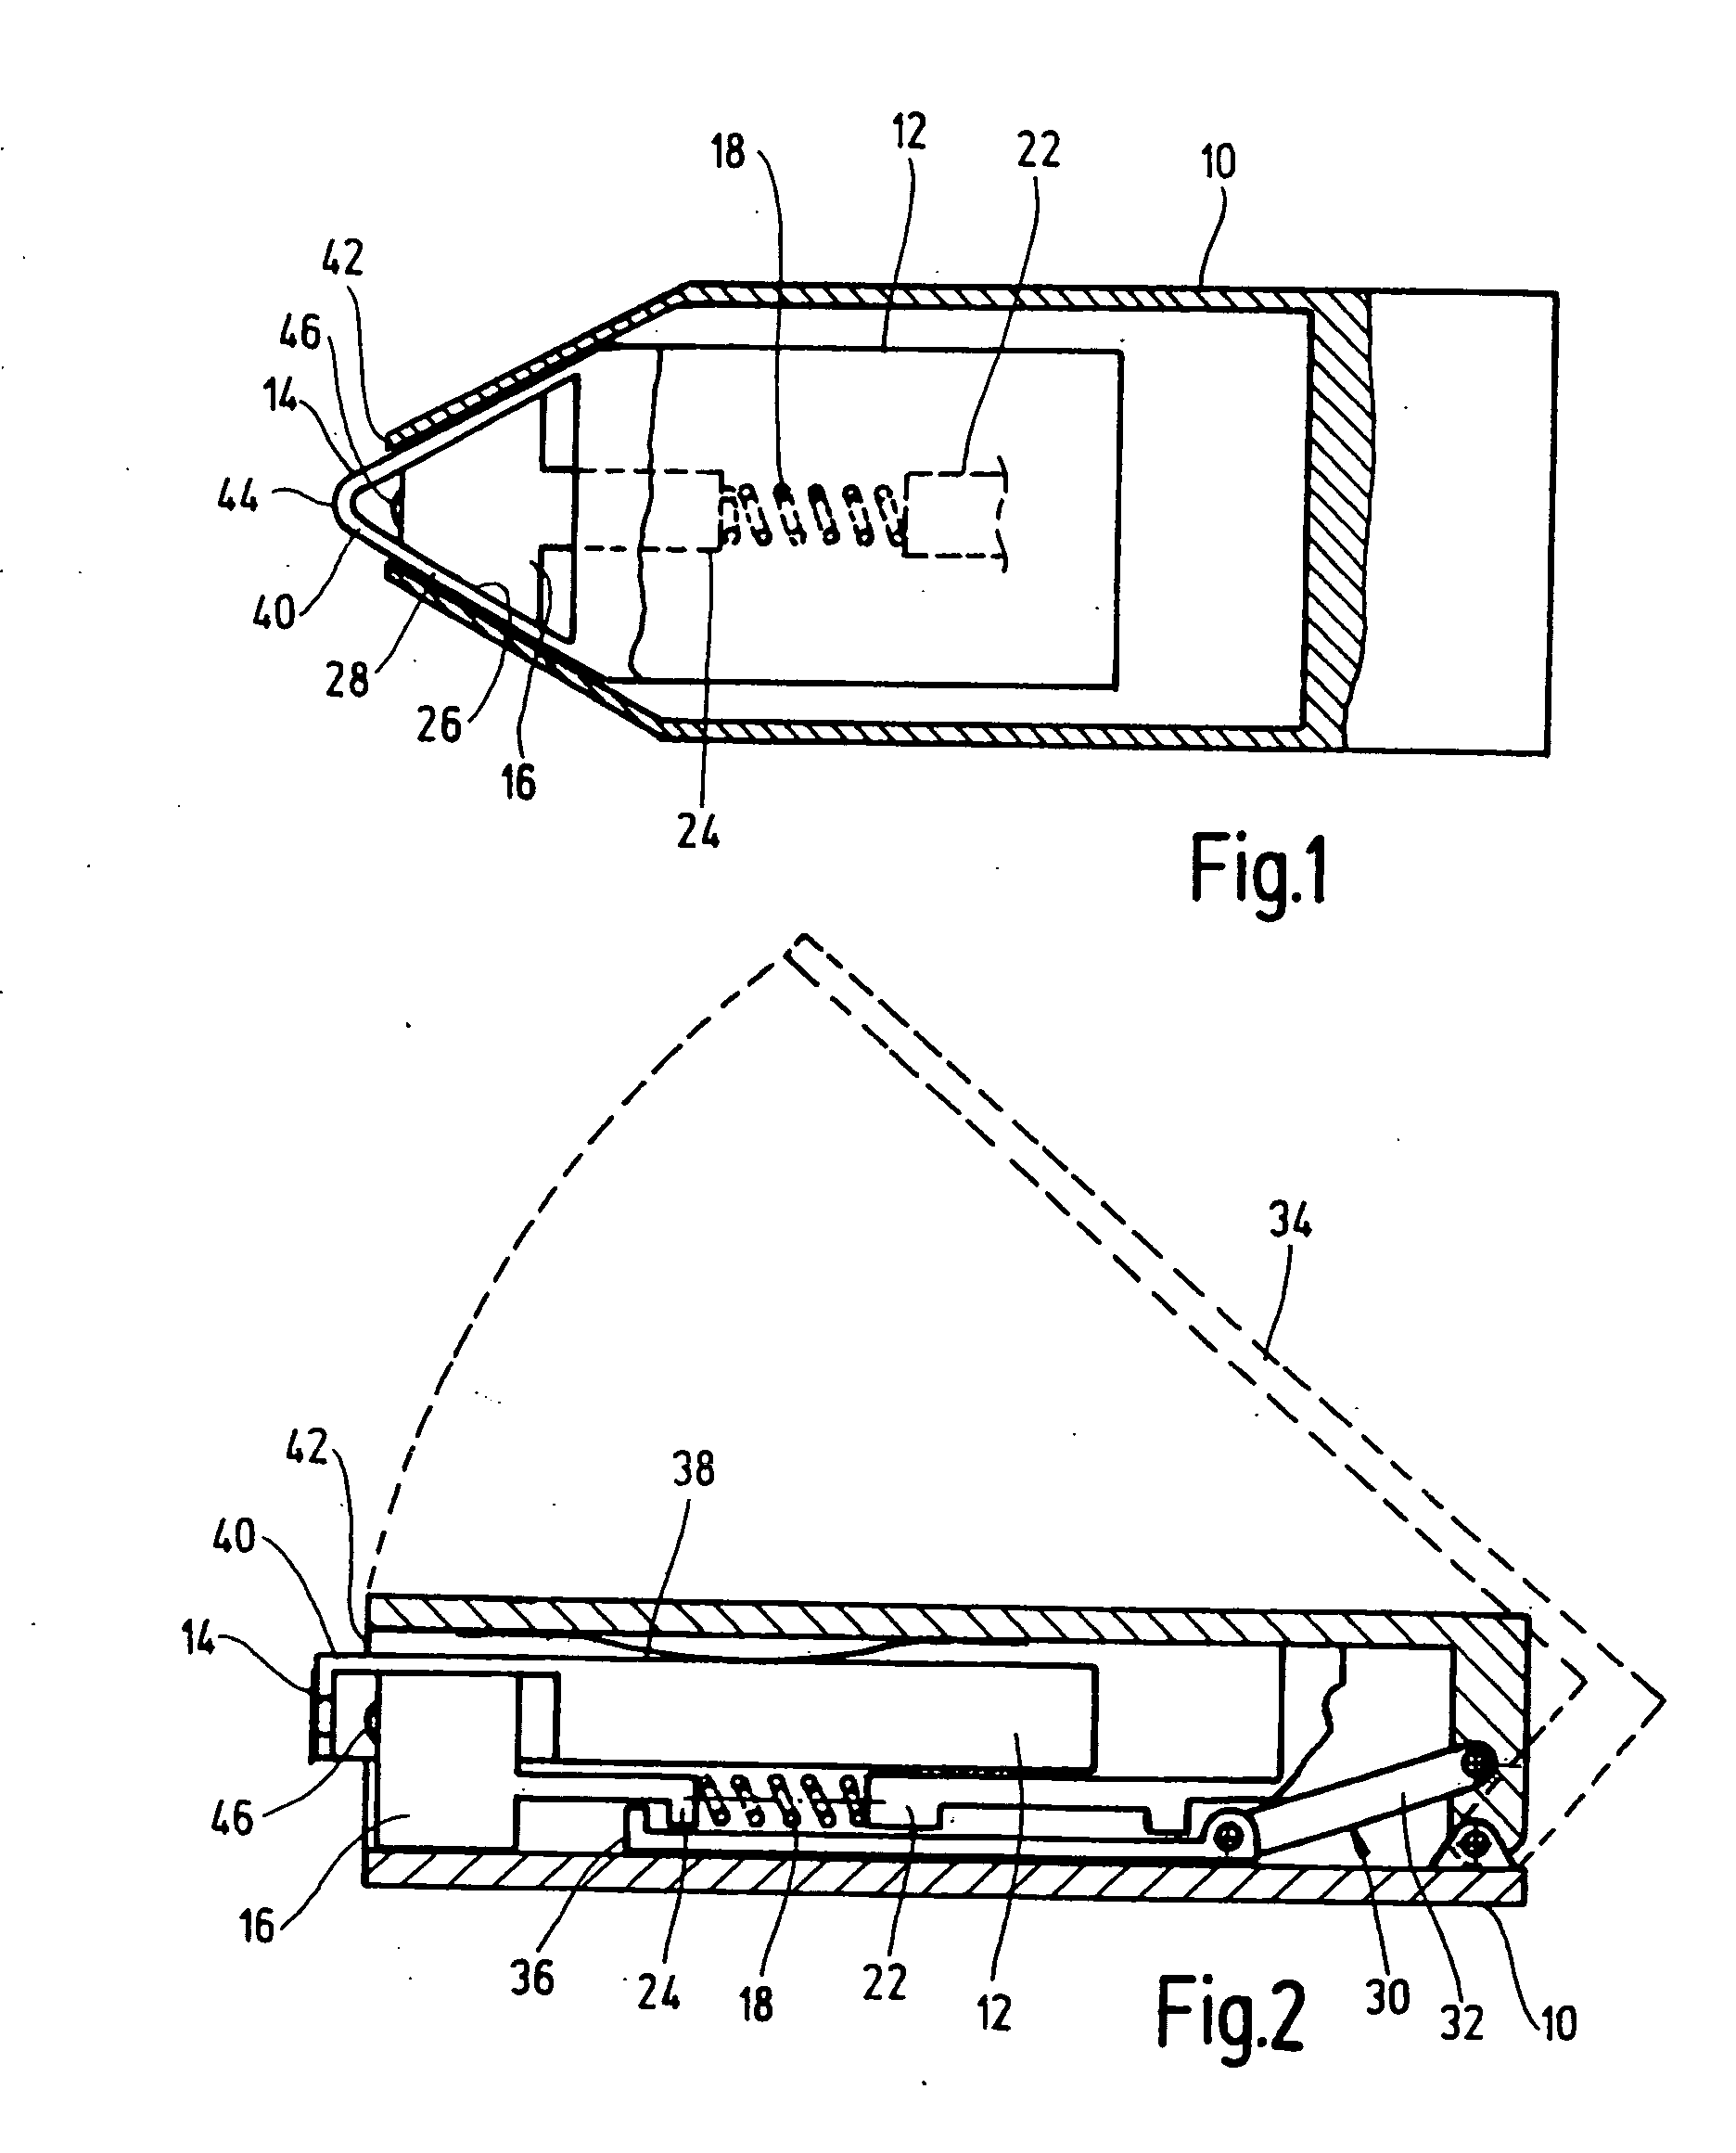 Manual device for examining a body fluid